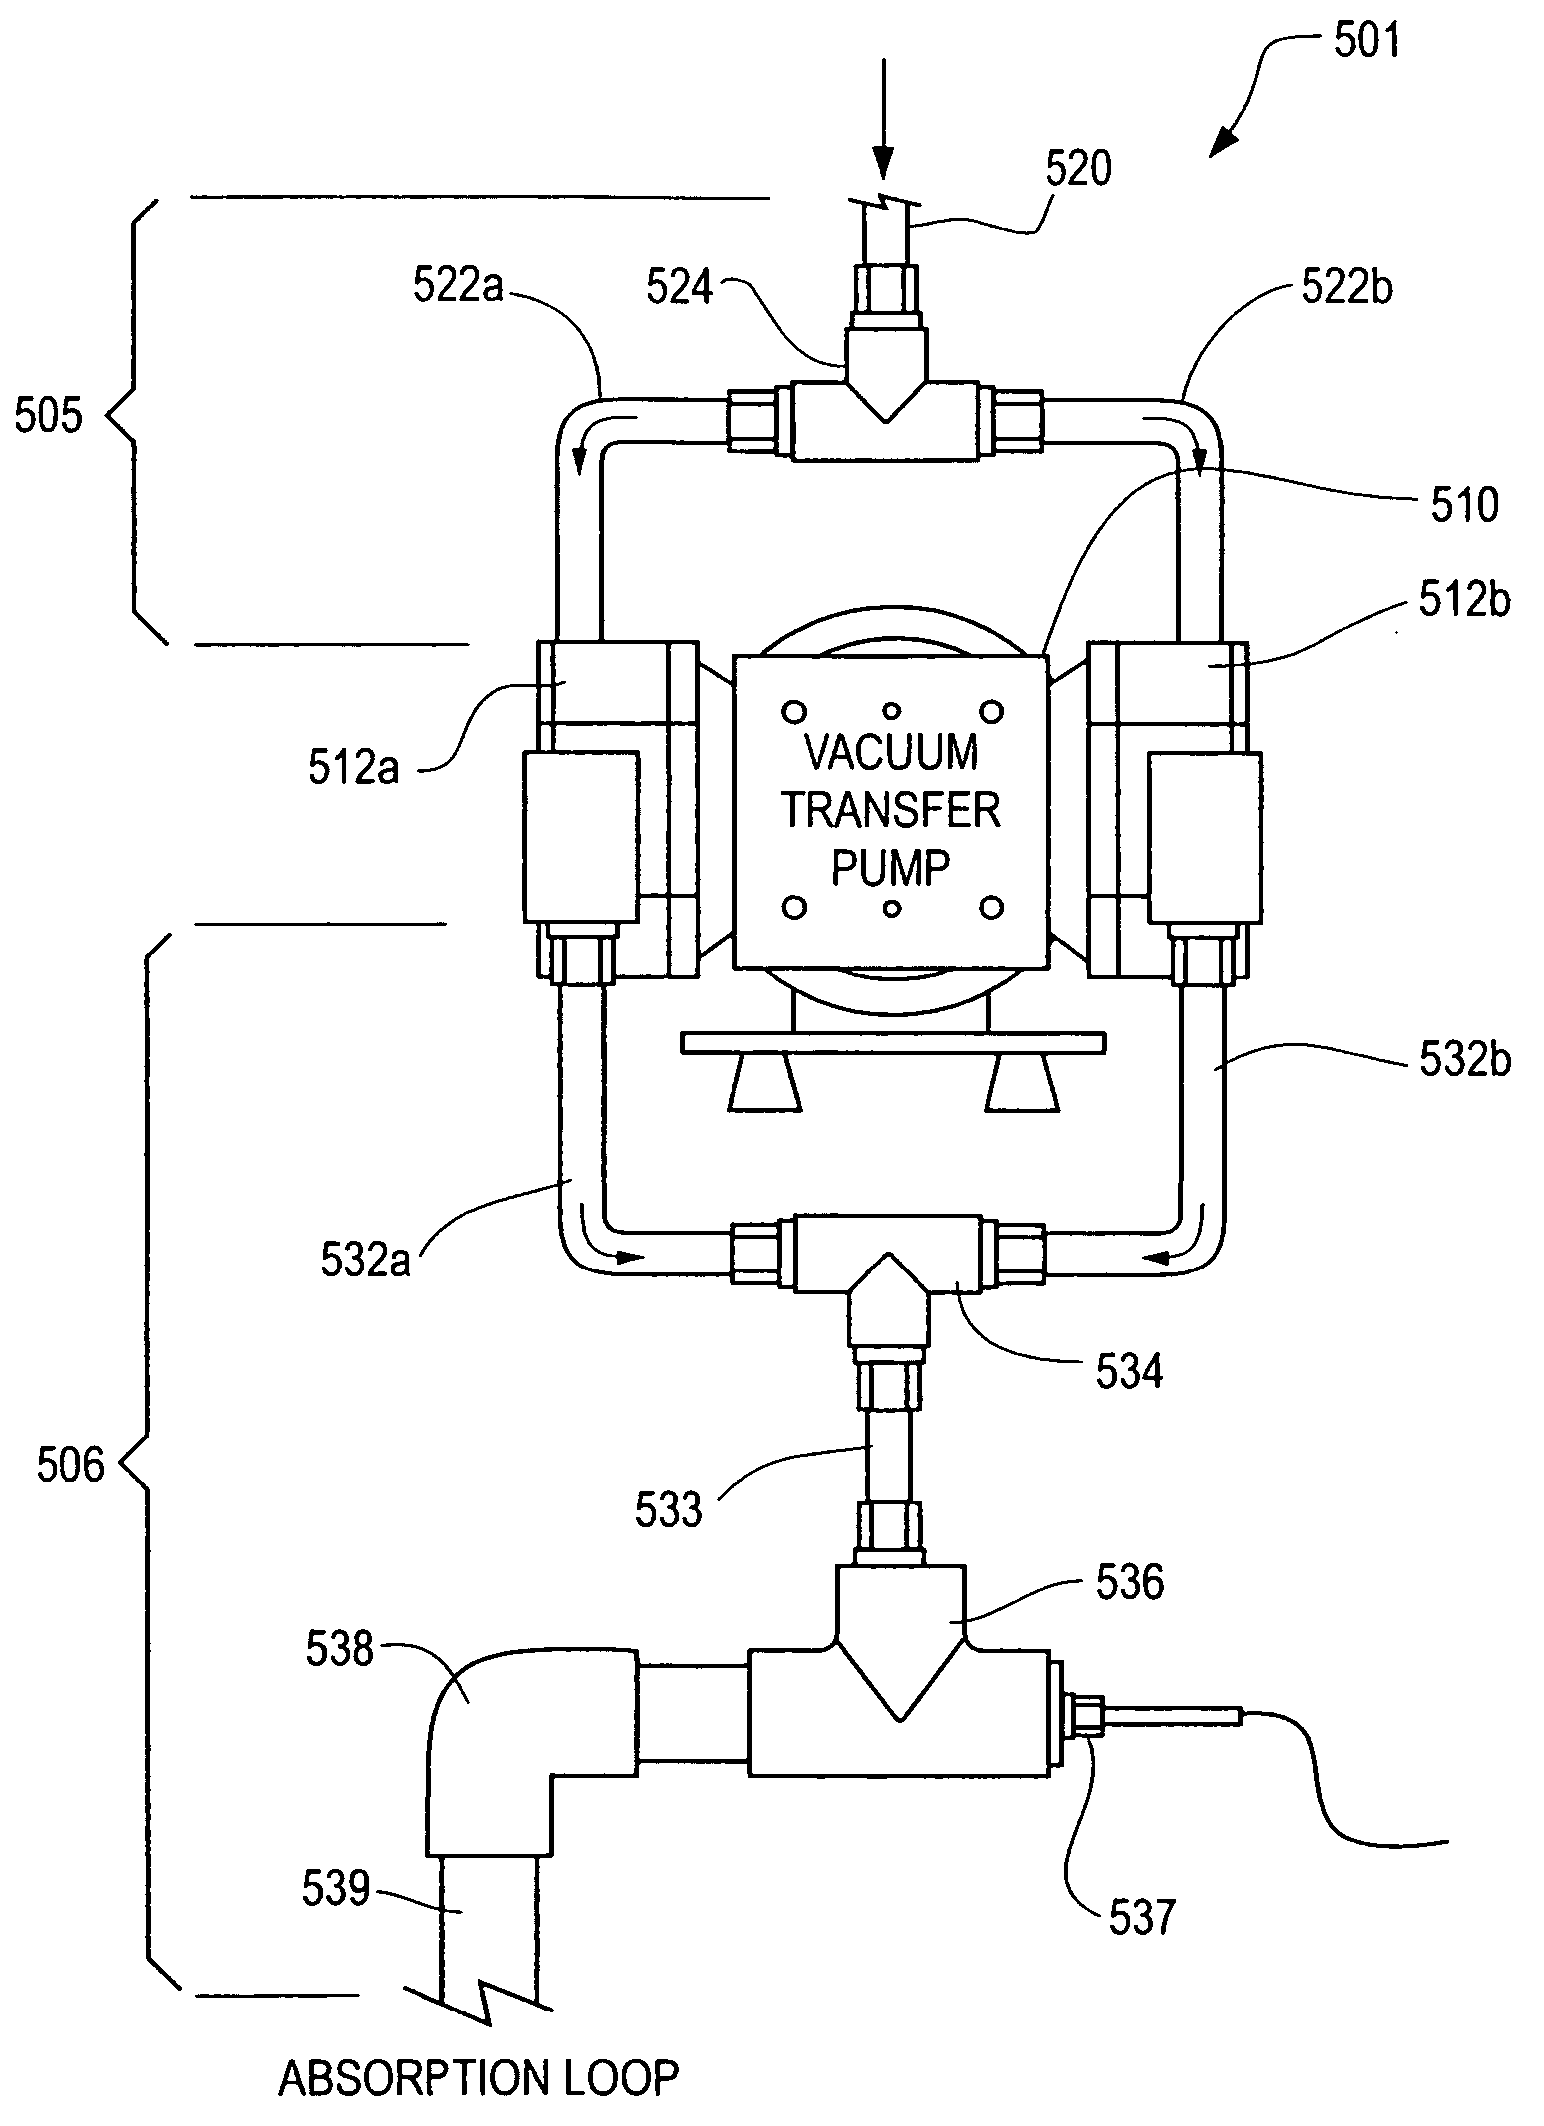 Chlorine dioxide solution generator with temperature control capability